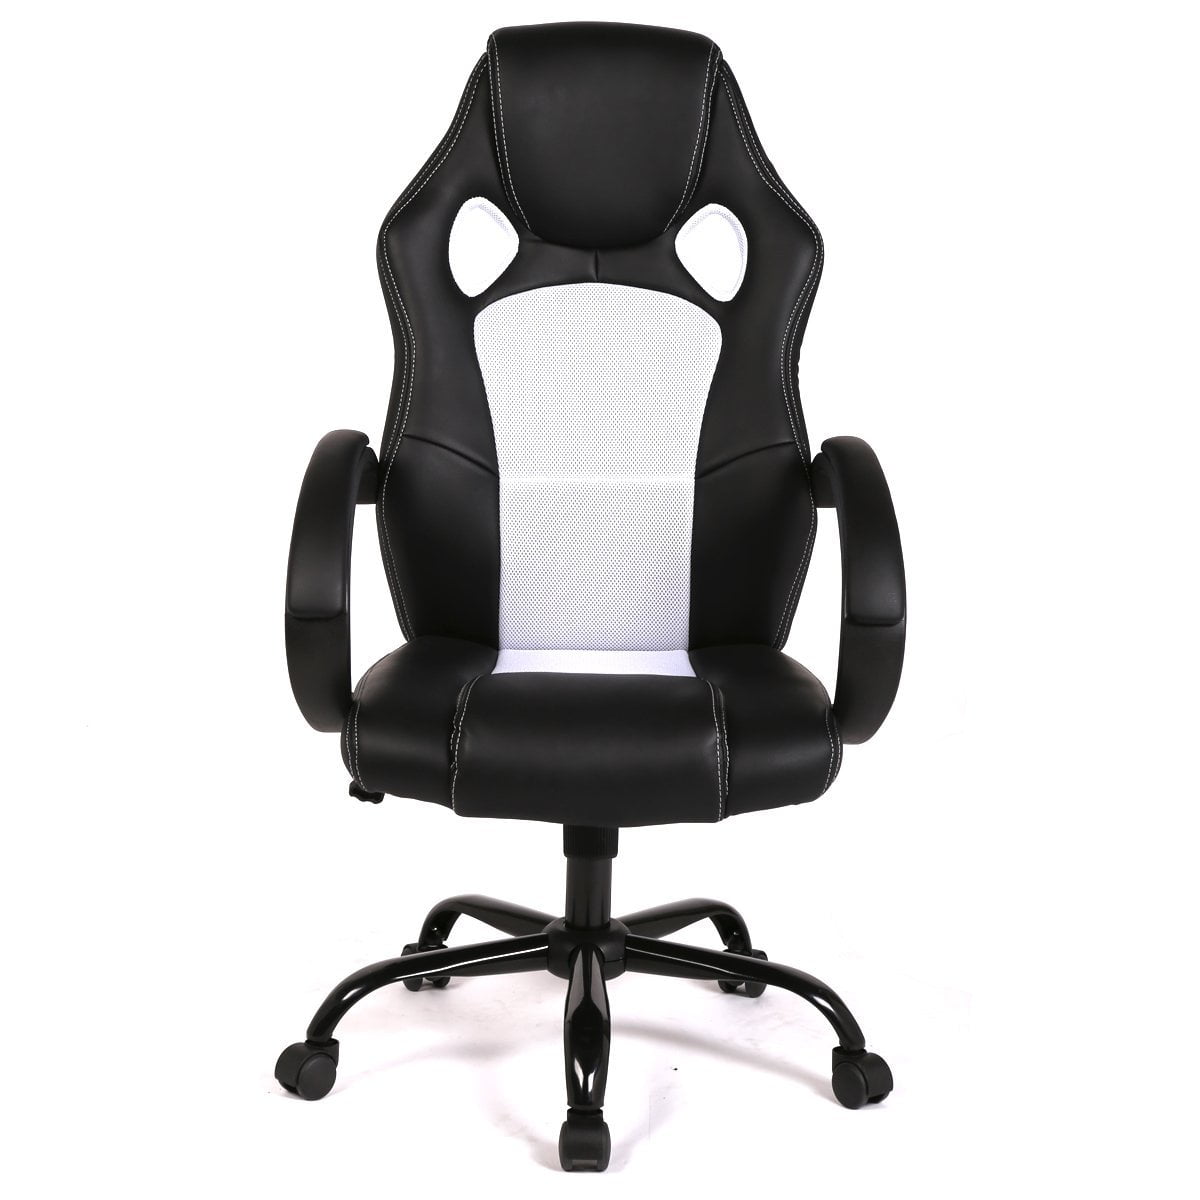 Homall Gaming Chair High Back Computer Chair Racing Style Office Chair Embossing Design Pu Leather Bucket Seat Desk Chair with Adjustable Armrest Ergonomic Headrest and Lumbar Support White 